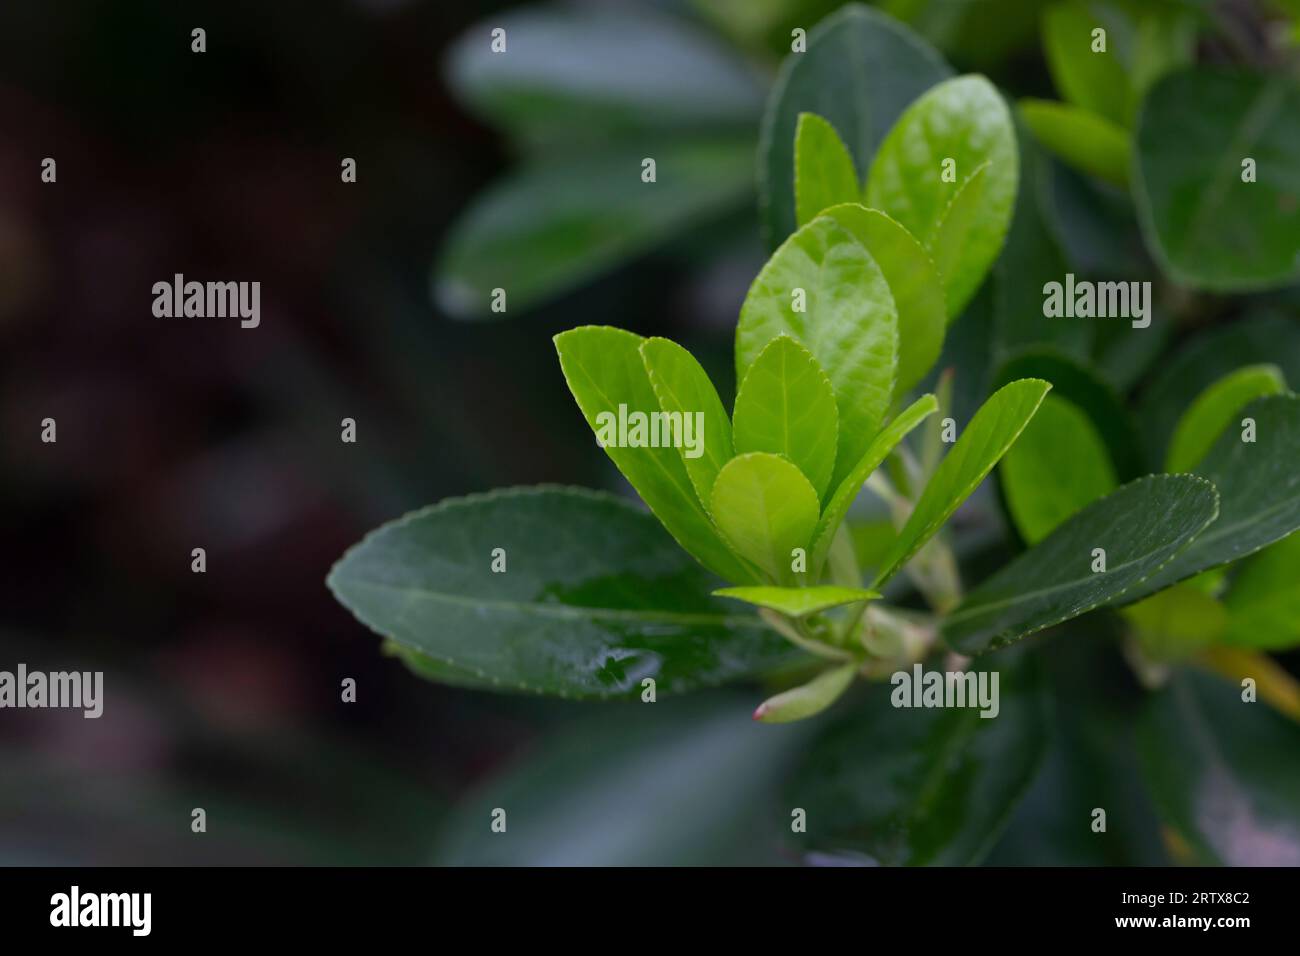 euonymus japonicus or japanese euonymus green shrub plant background in spring, fresh young leaves selective focus Stock Photo